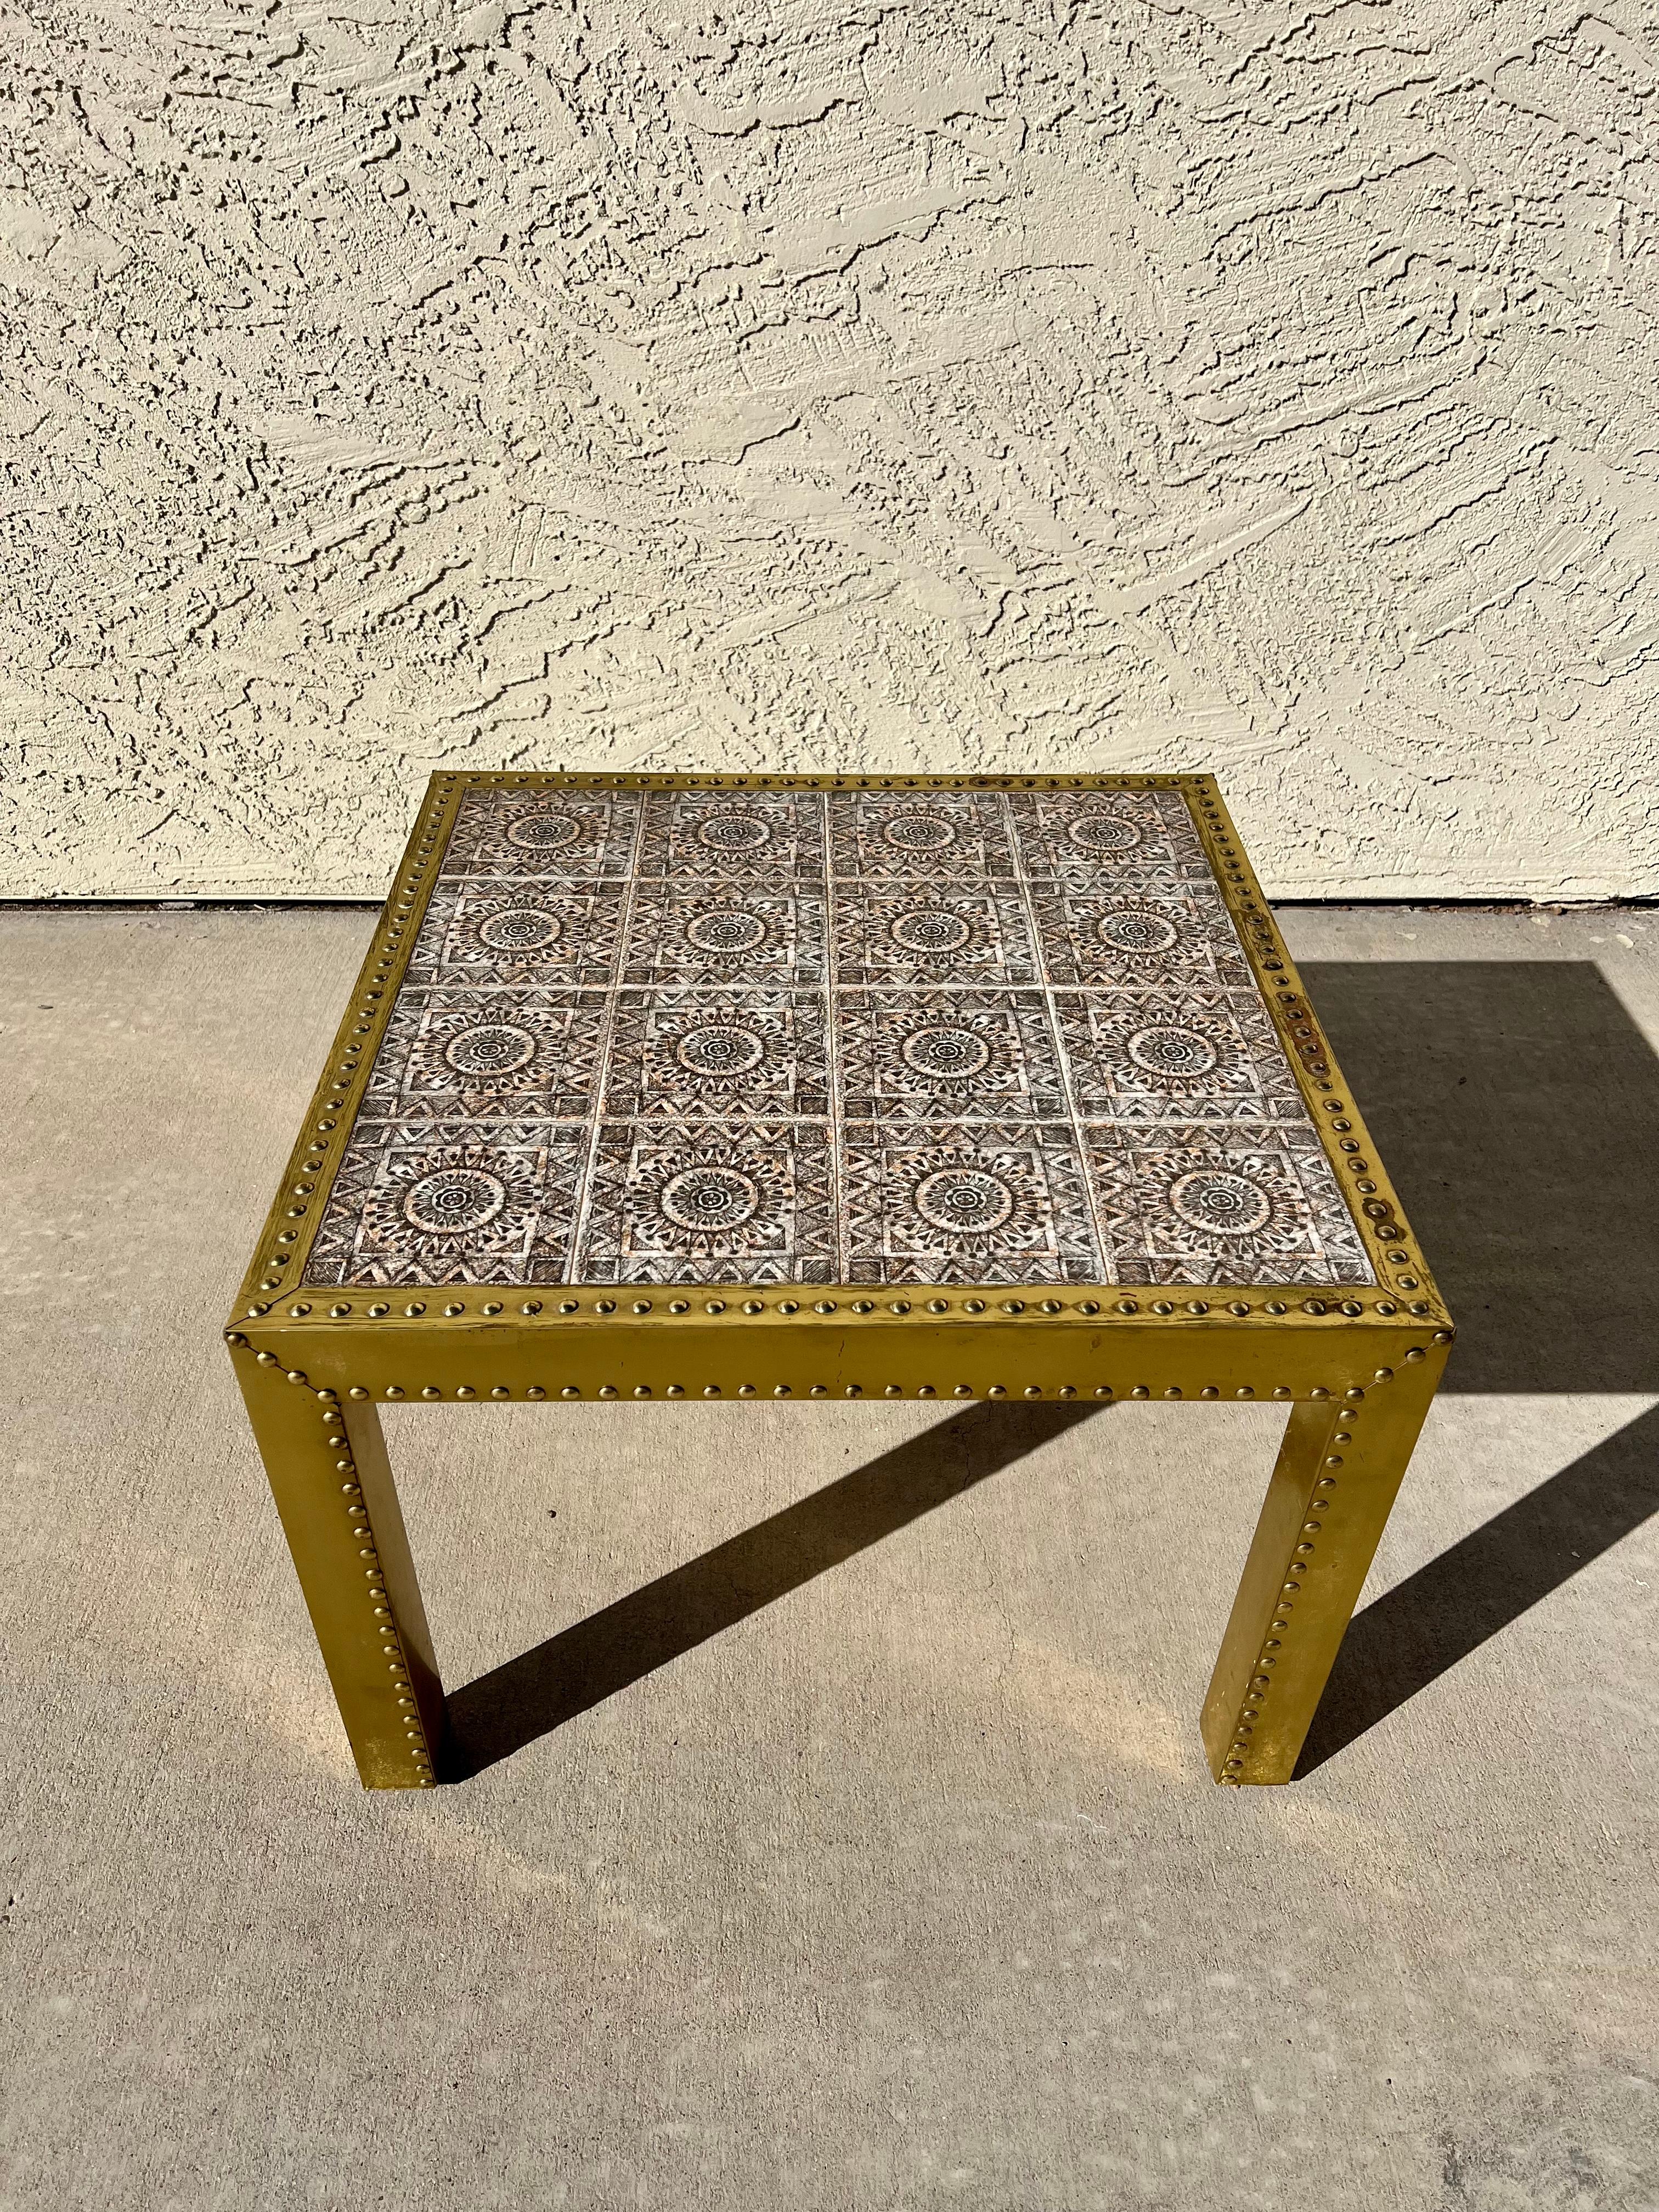 One of a kind, never seen another brass clad studded with handpainted mosaic tile top coffee/cocktail/large side table. Very nice vintage condition with some minor corrosion to the top of the brass but overall presents beautifully and the patina is